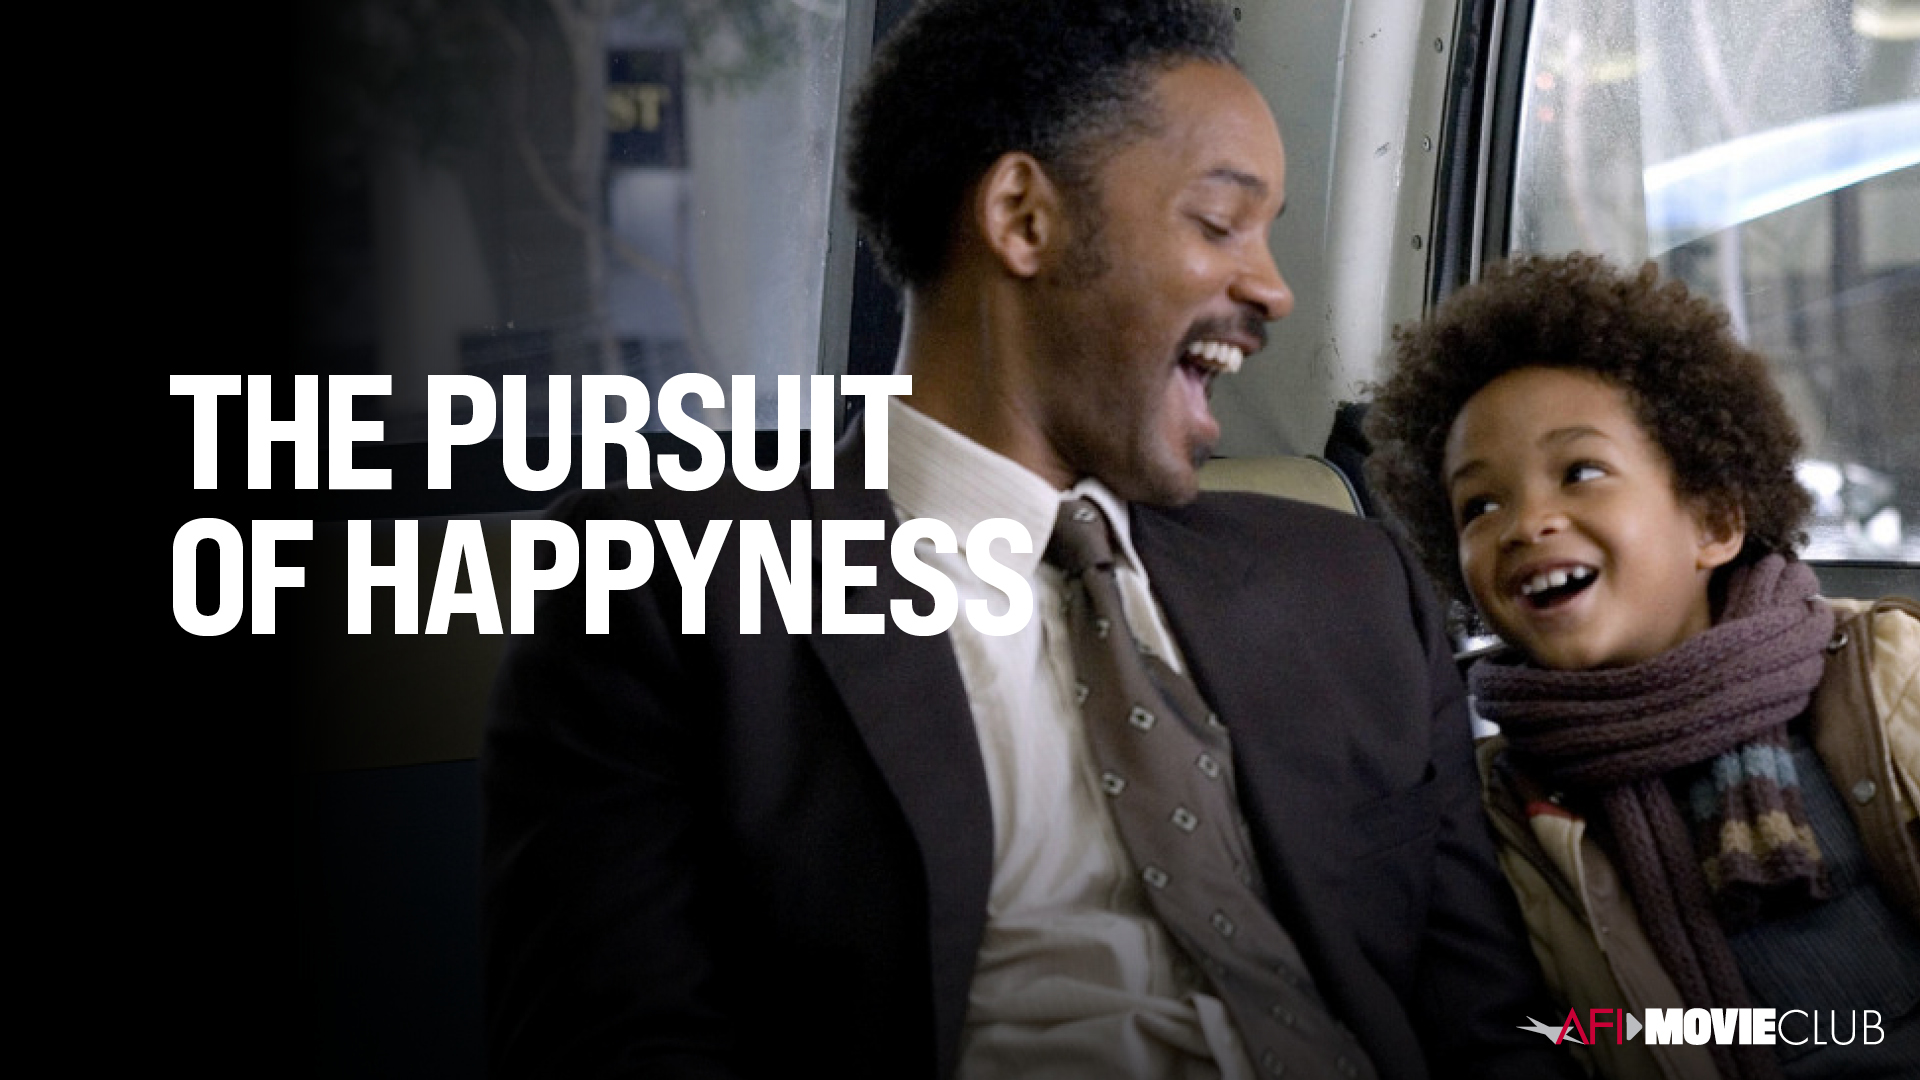 The Pursuit of Happyness Film Still - Will Smith and Jaden Smith